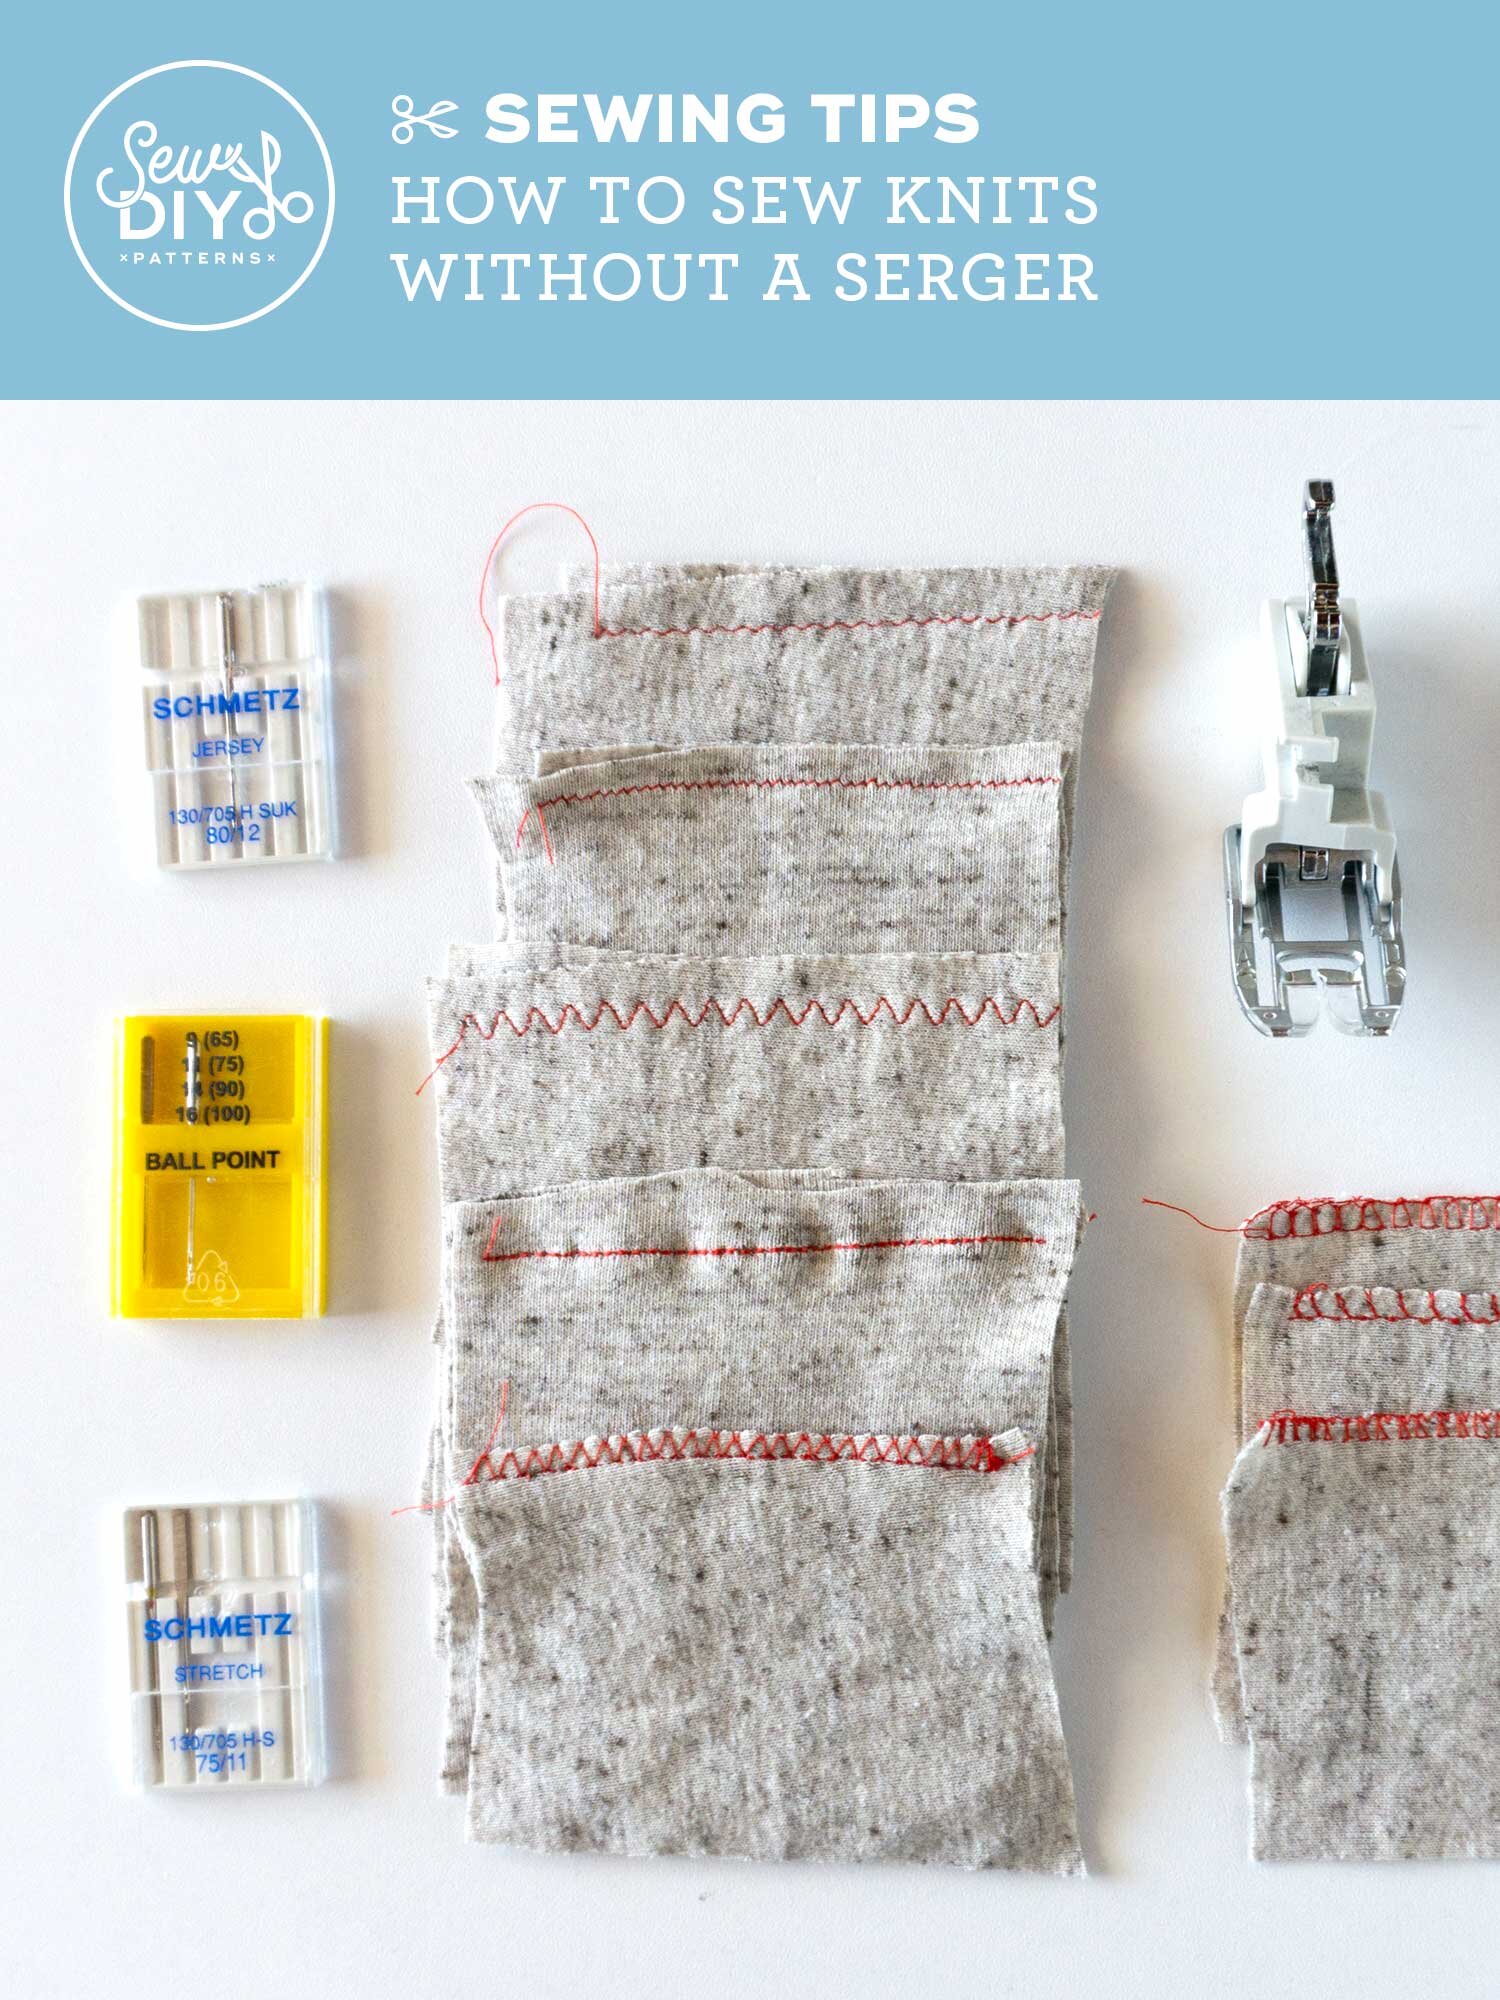 6 Tips for Learning to Sew Without Patterns - Resources for a